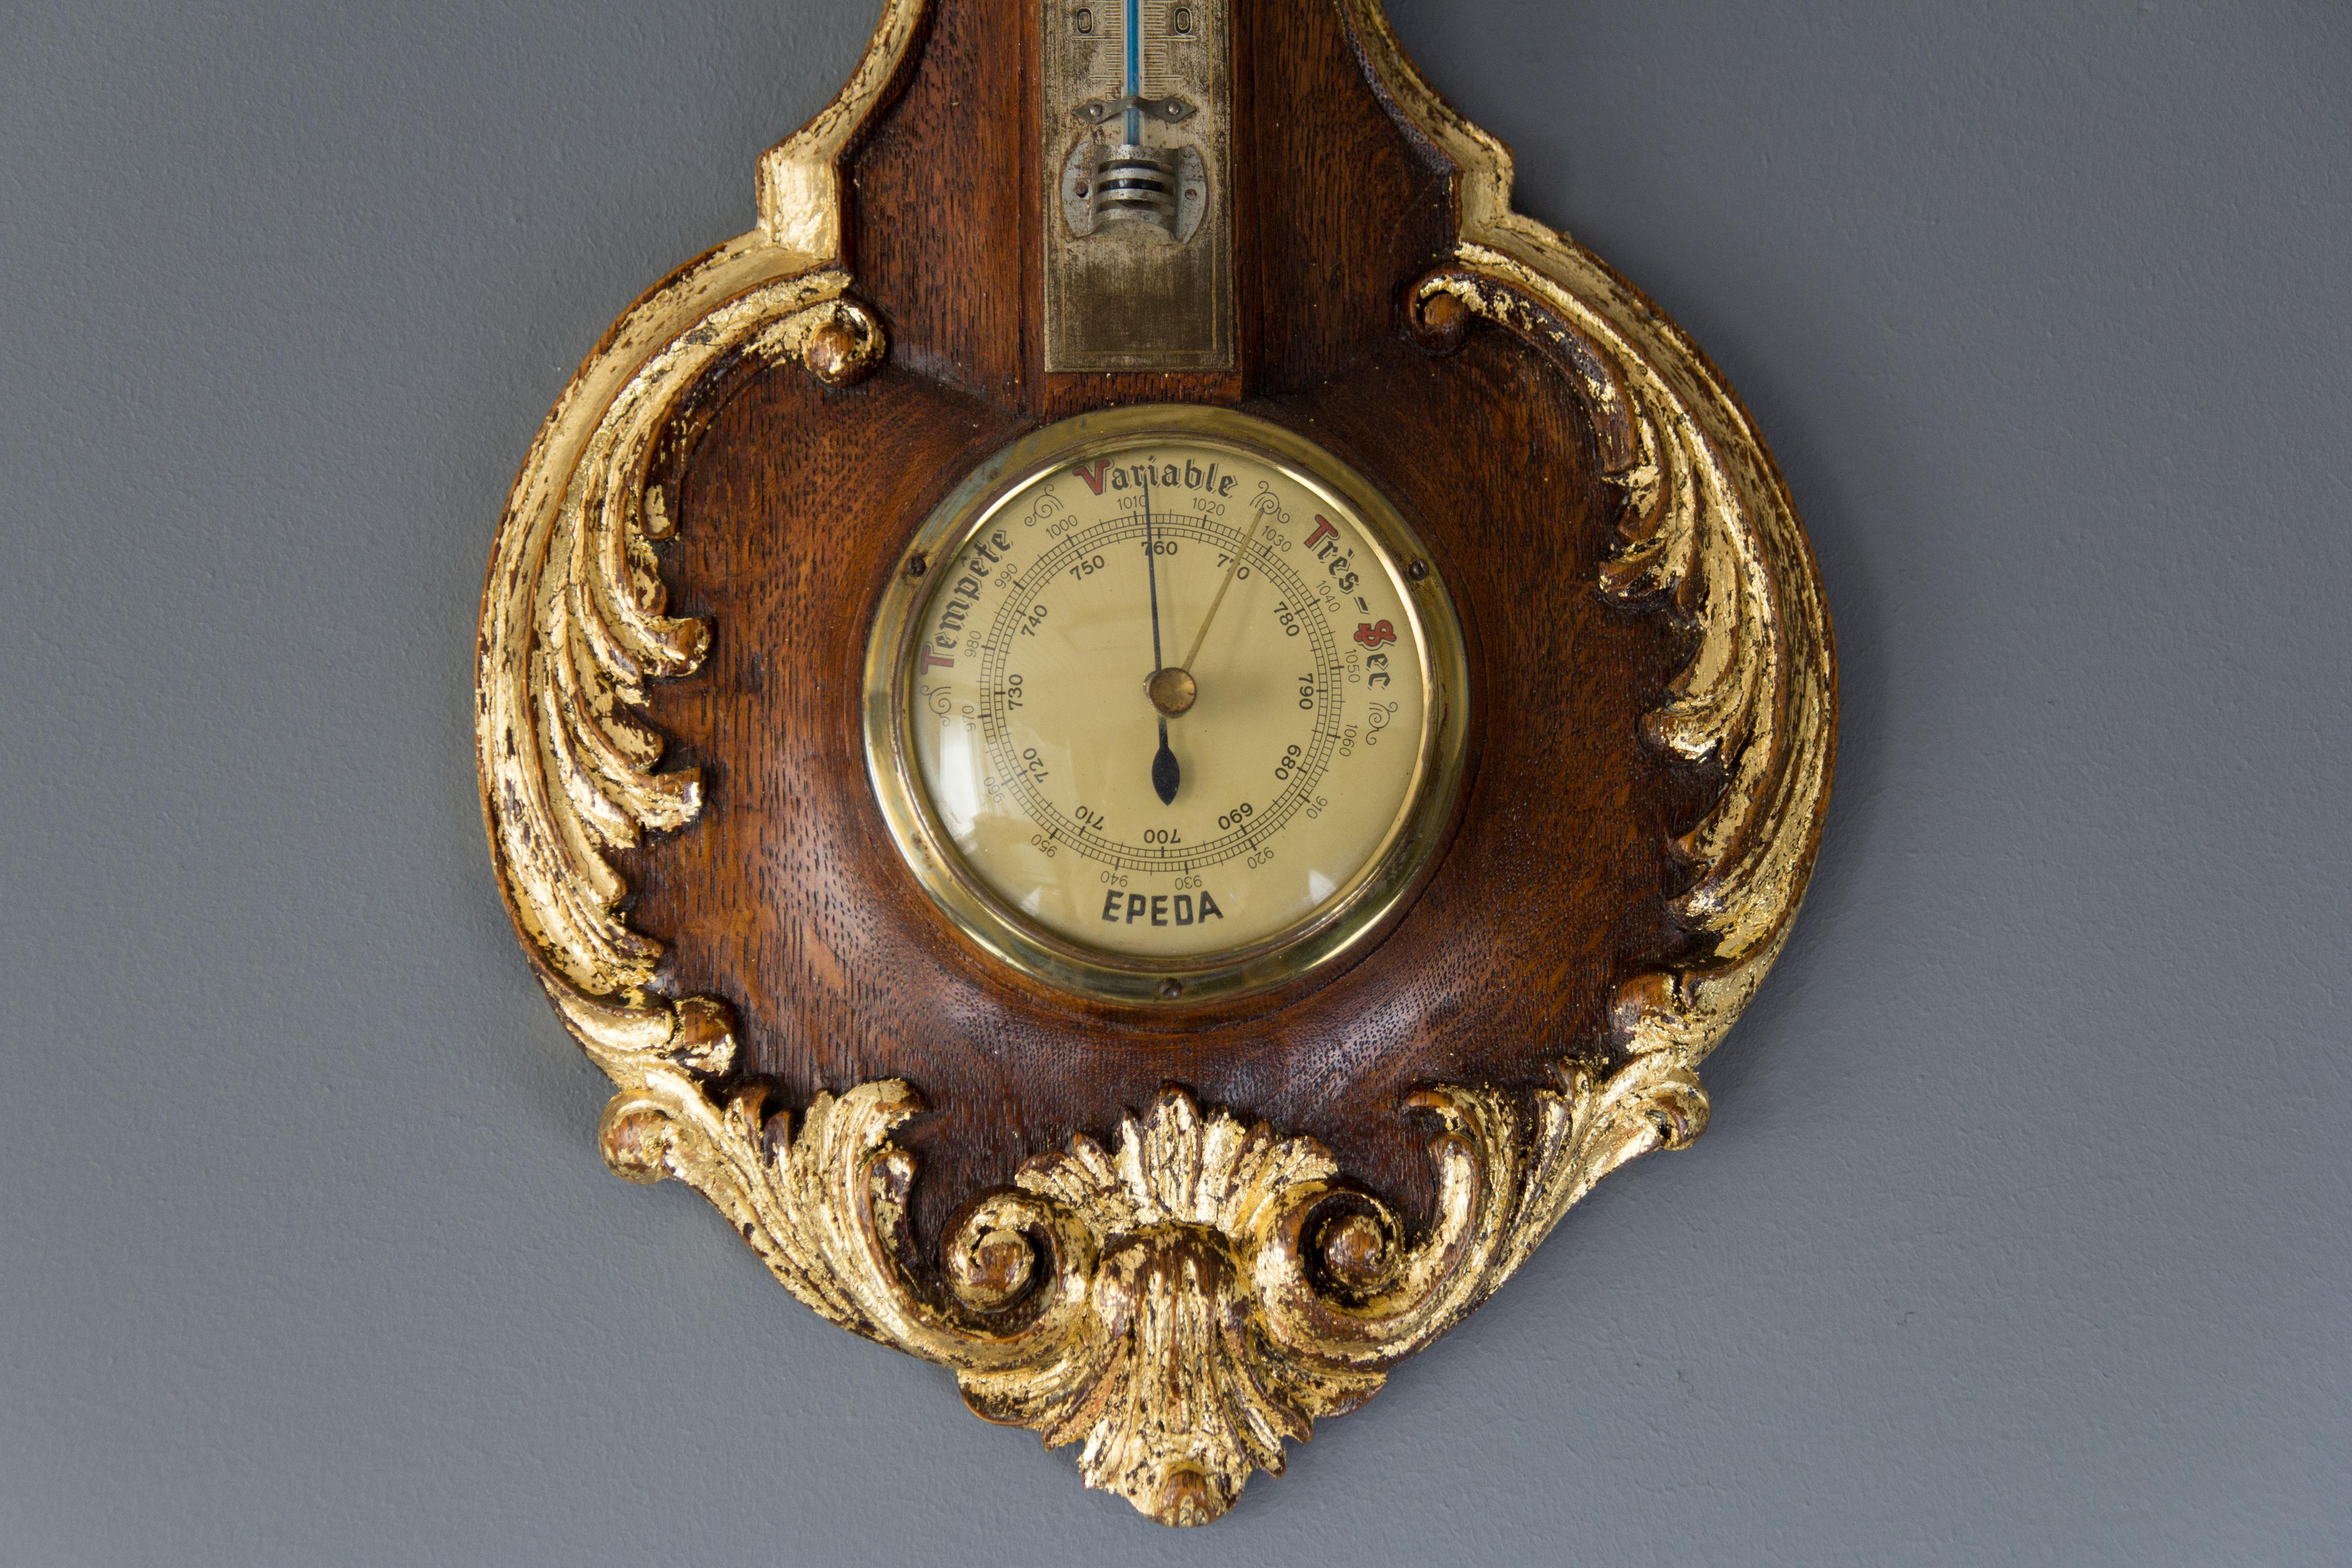 This barometer features a beautifully carved oak-wood frame with Rococo or Louis XV style leaf and rocaille details. Above the barometer, there is a thermometer in Celsius degrees. Europe, the 1920s.
Dimensions: Height 39 cm / 15.35 in, width 20 cm